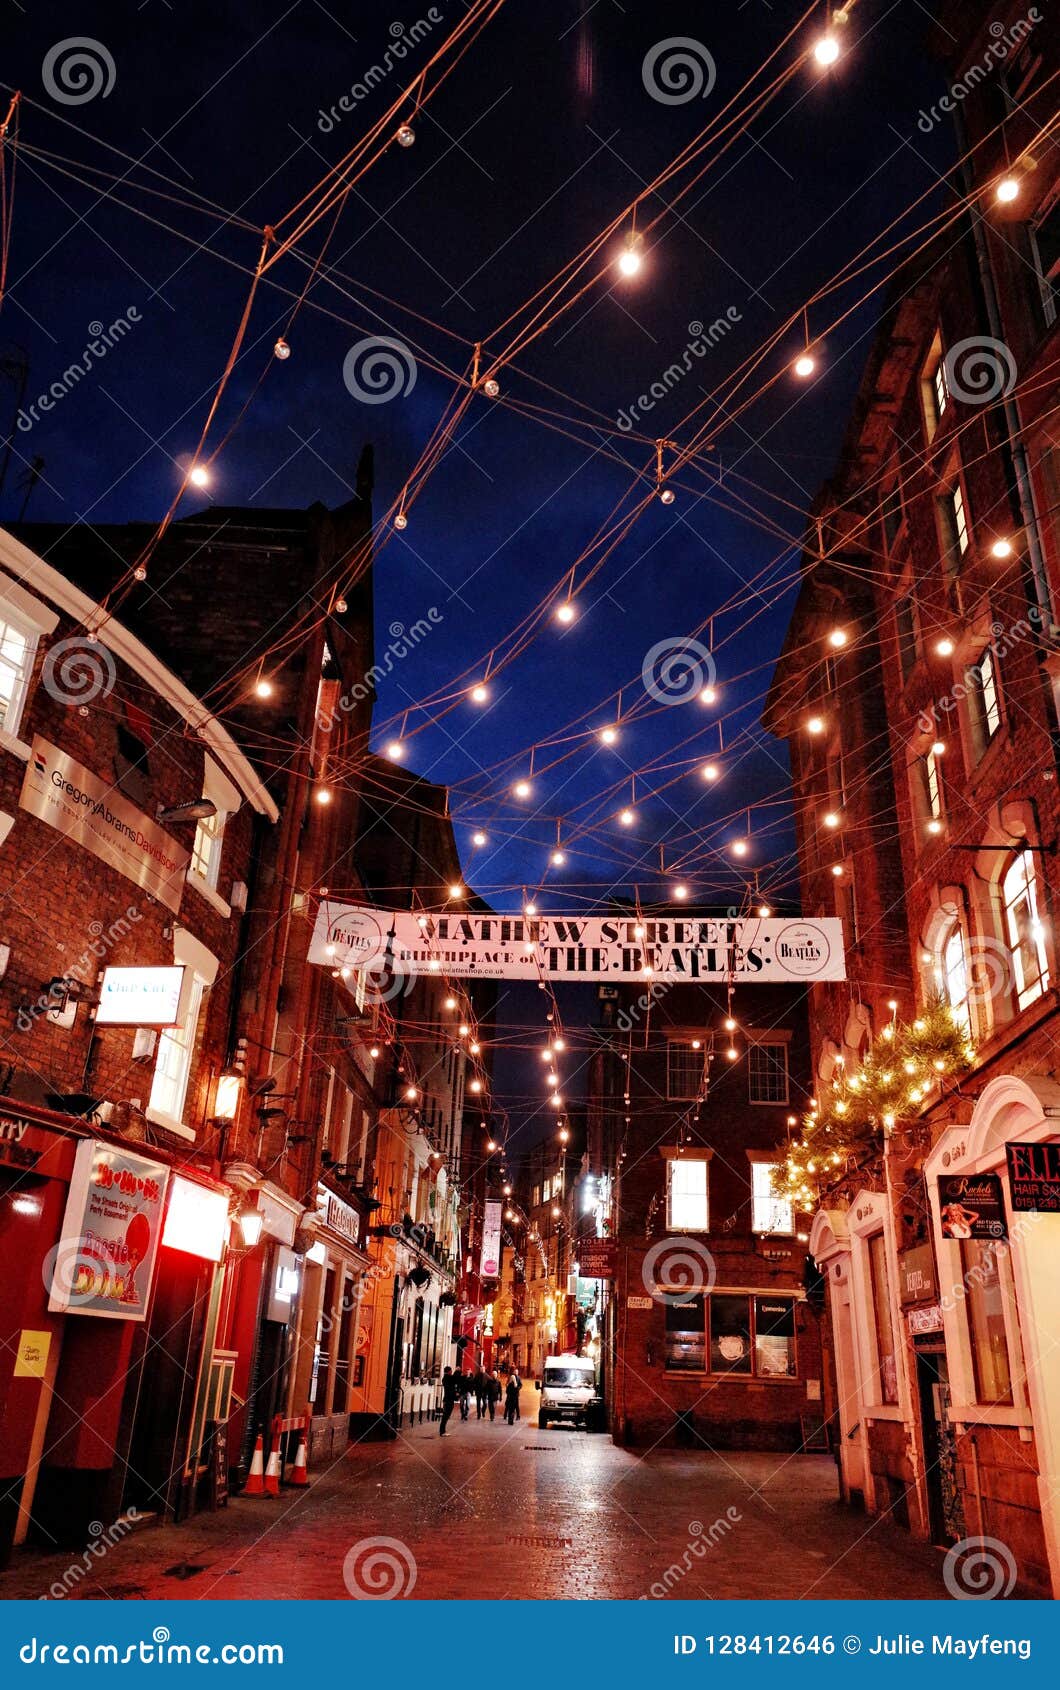 Mathew Street at Night, in Liverpool, England Editorial Photo - Image ...